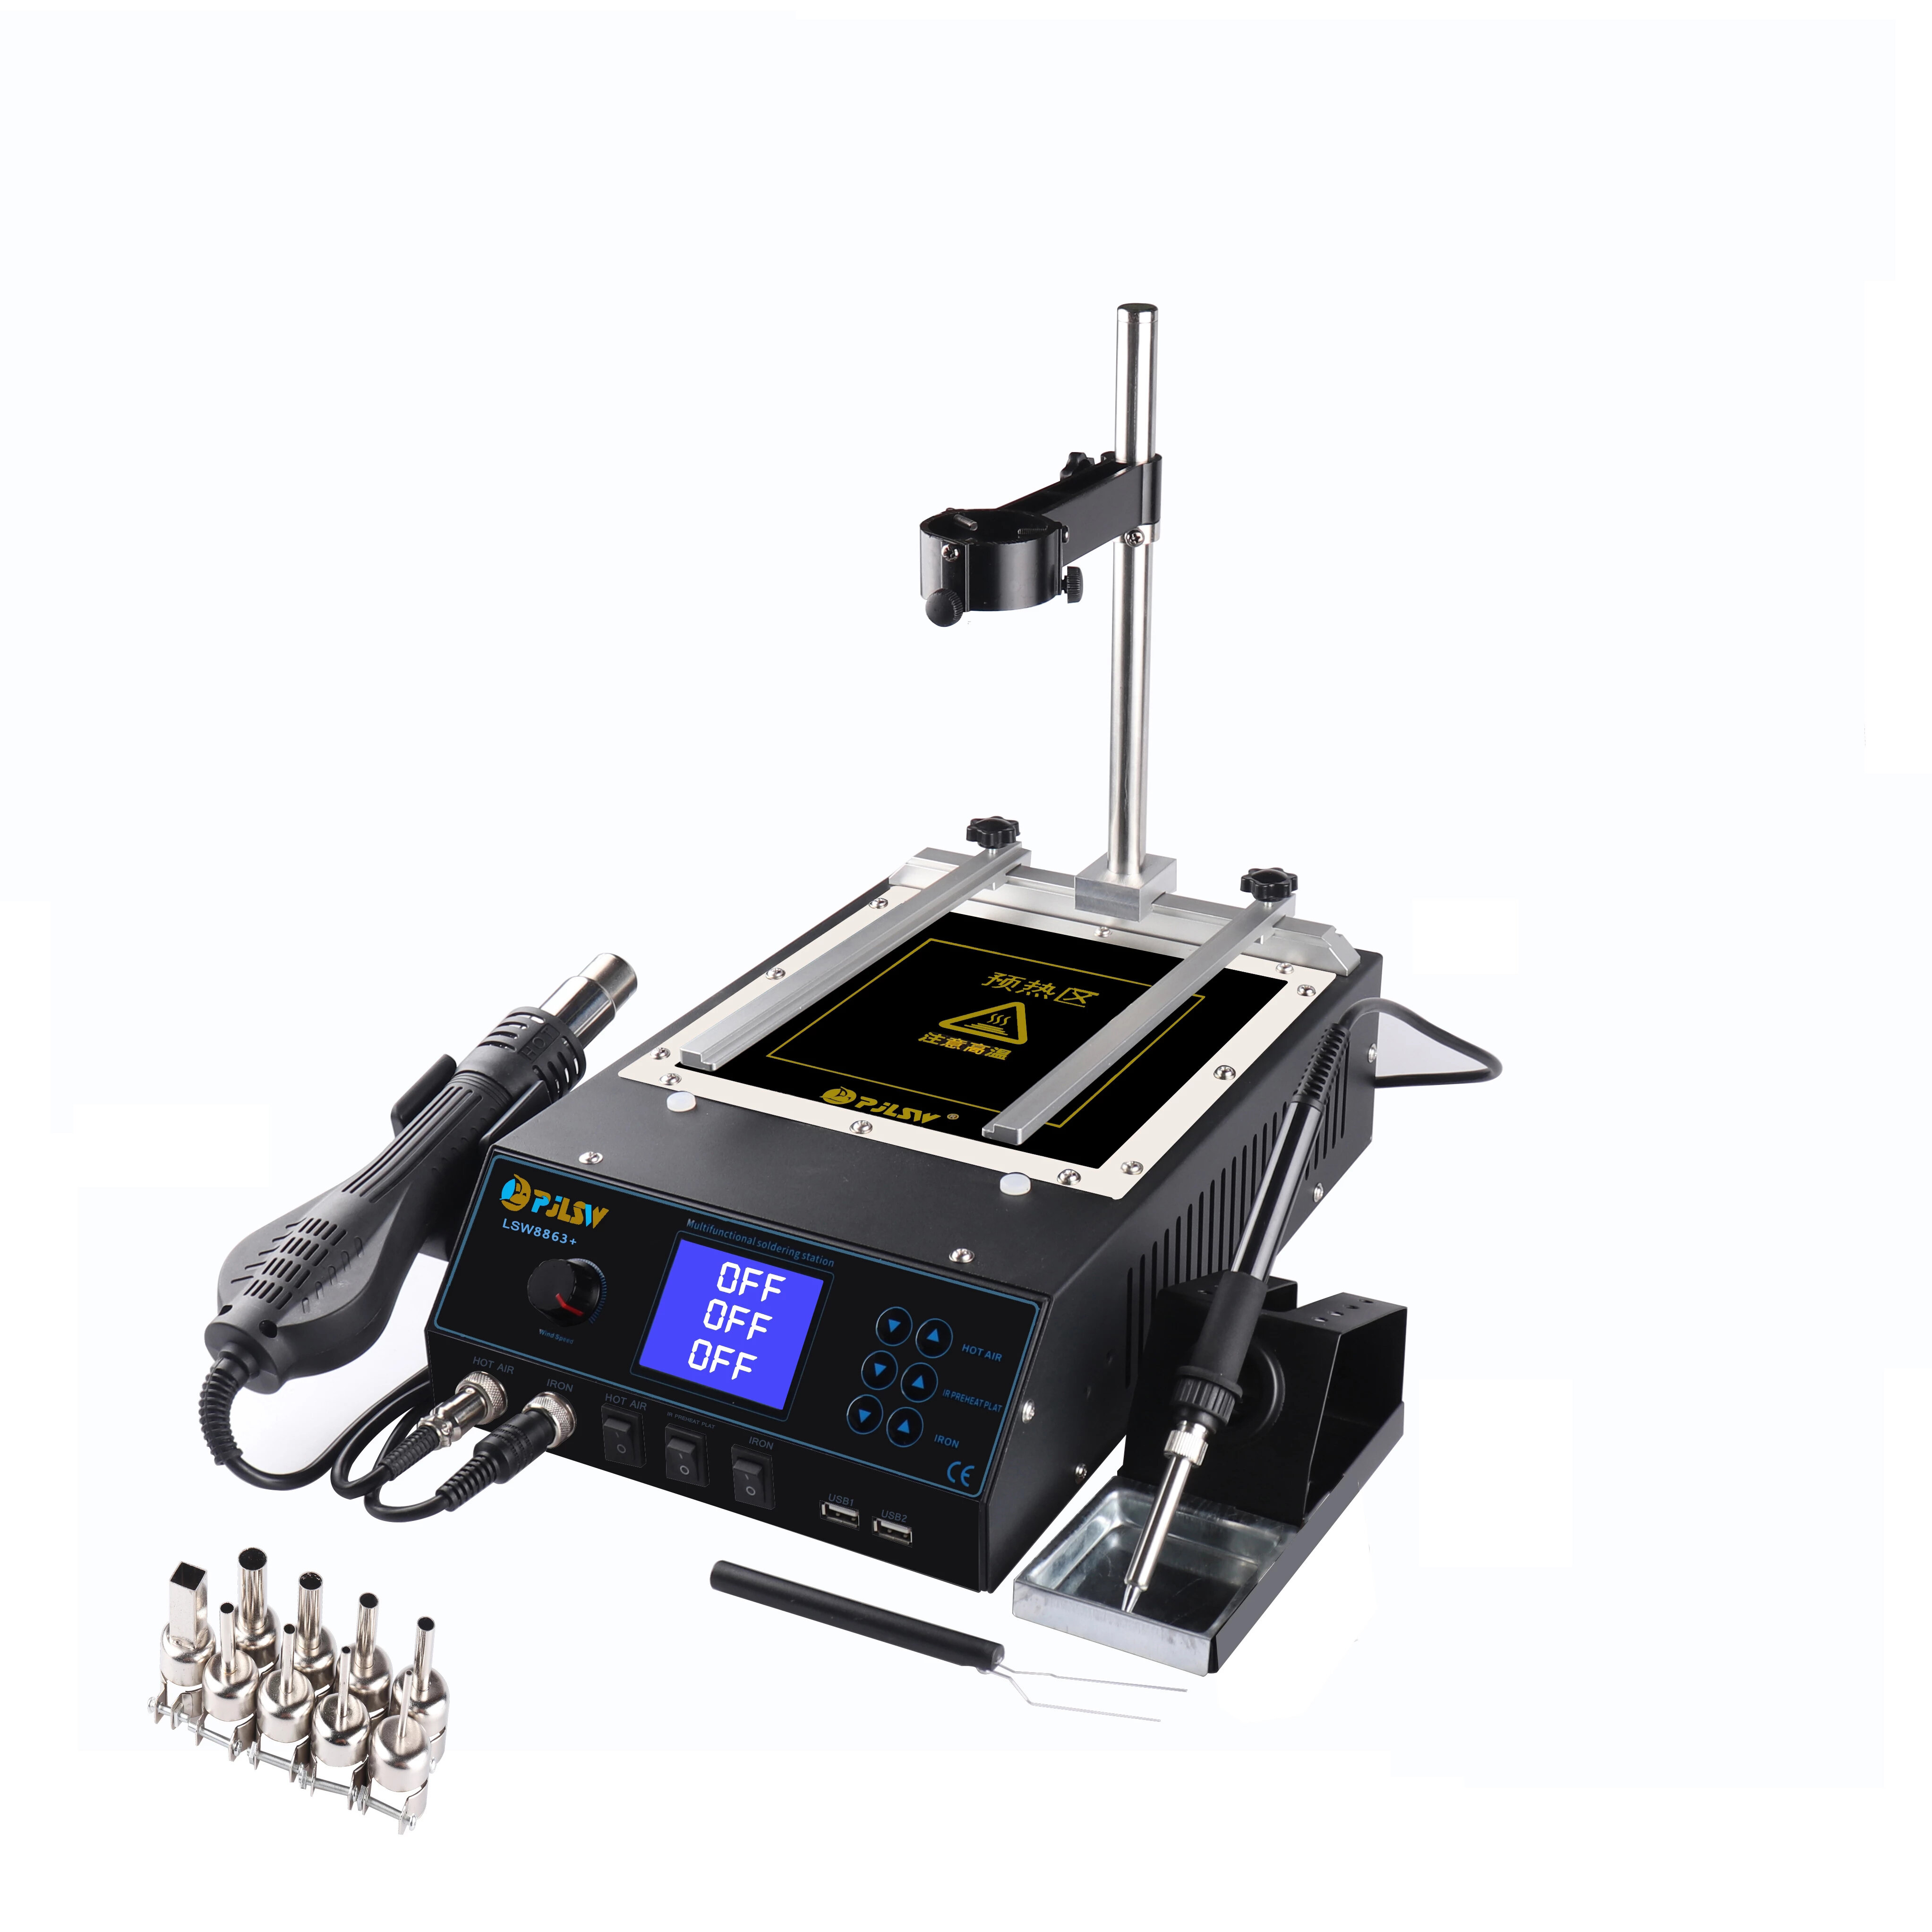 

New 8863 + 4-in-1 Combination Soldering Station, BGA Rework Station, Hot Air Gun Part, Infrared Preheating Combination